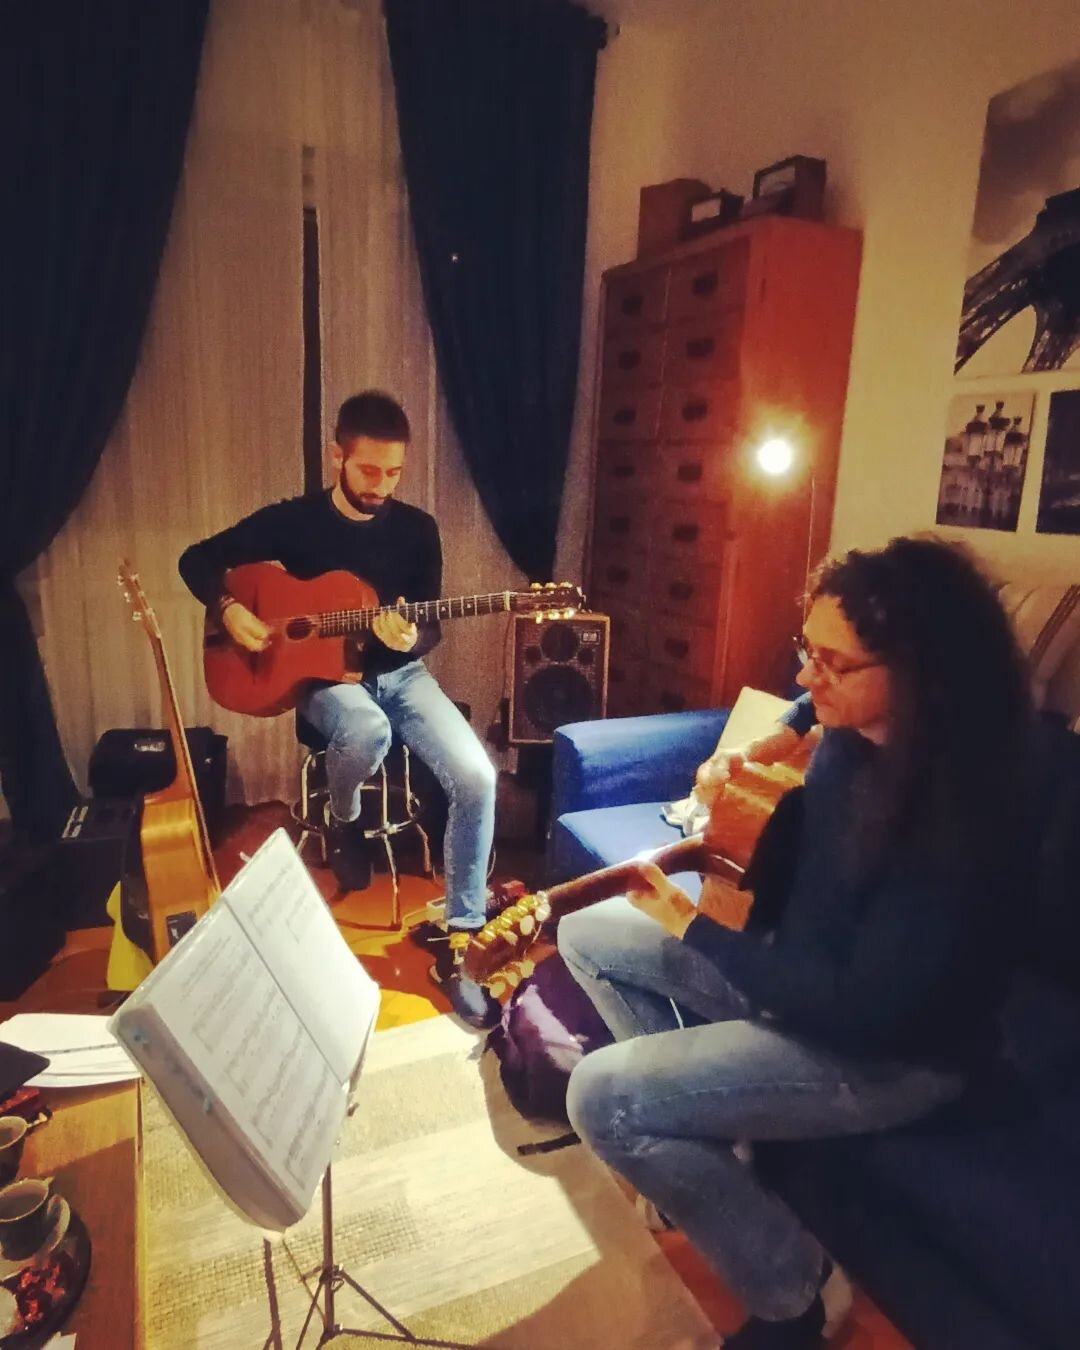 #somethingiscooking life of a musician is certainly full of surprises and connections!
Since coming here in #trieste I have been incredibly lucky meeting up with both old and new friends.
Many great musicians are here in this beautiful corner of Ital